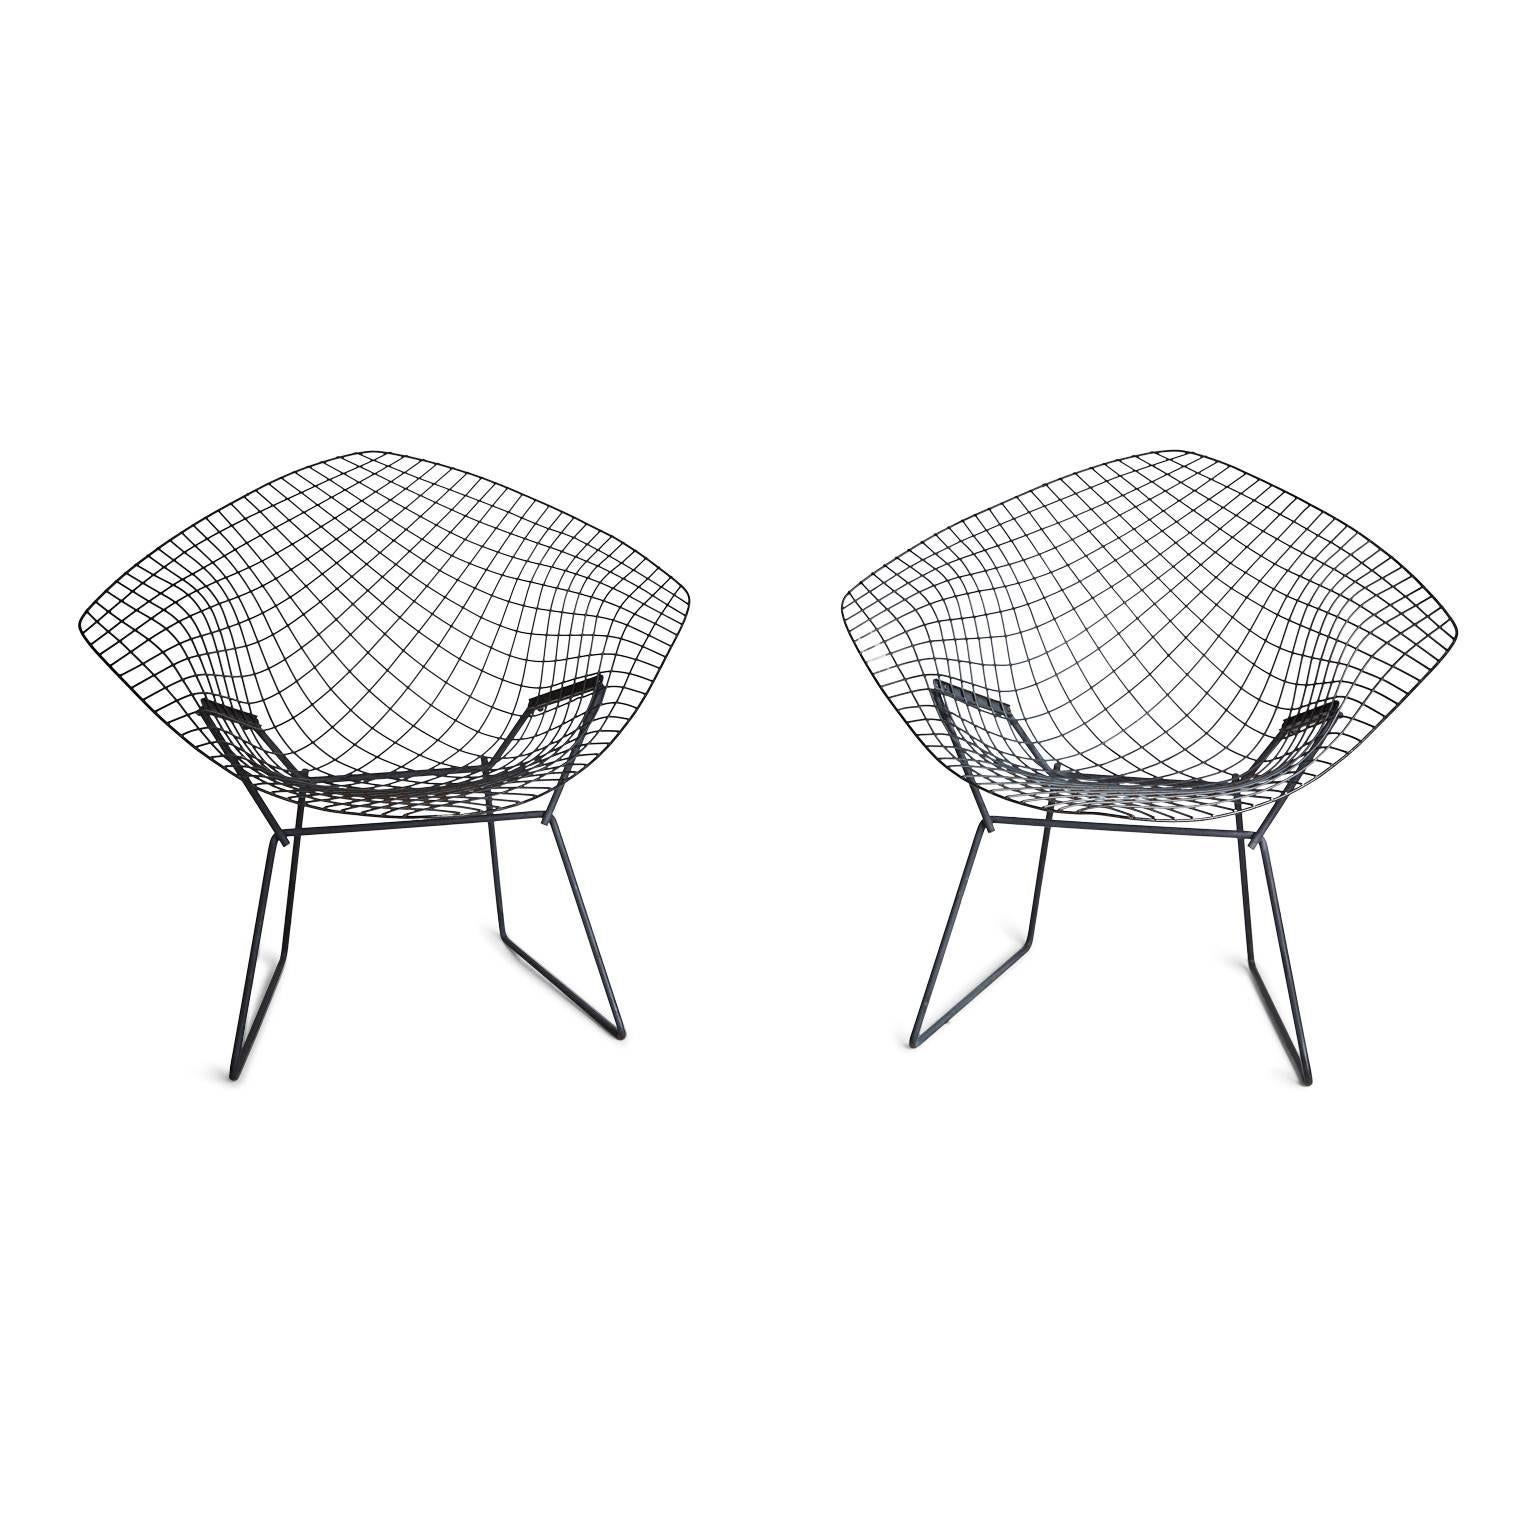 Since Harry Bertoia's Diamond chair was produced by Knoll in the 1950s these wire chairs have become one of the most iconic designs of Mid-Century Modernism. Both the pair of chairs and the matching ottoman are constructed of welded steel rods with